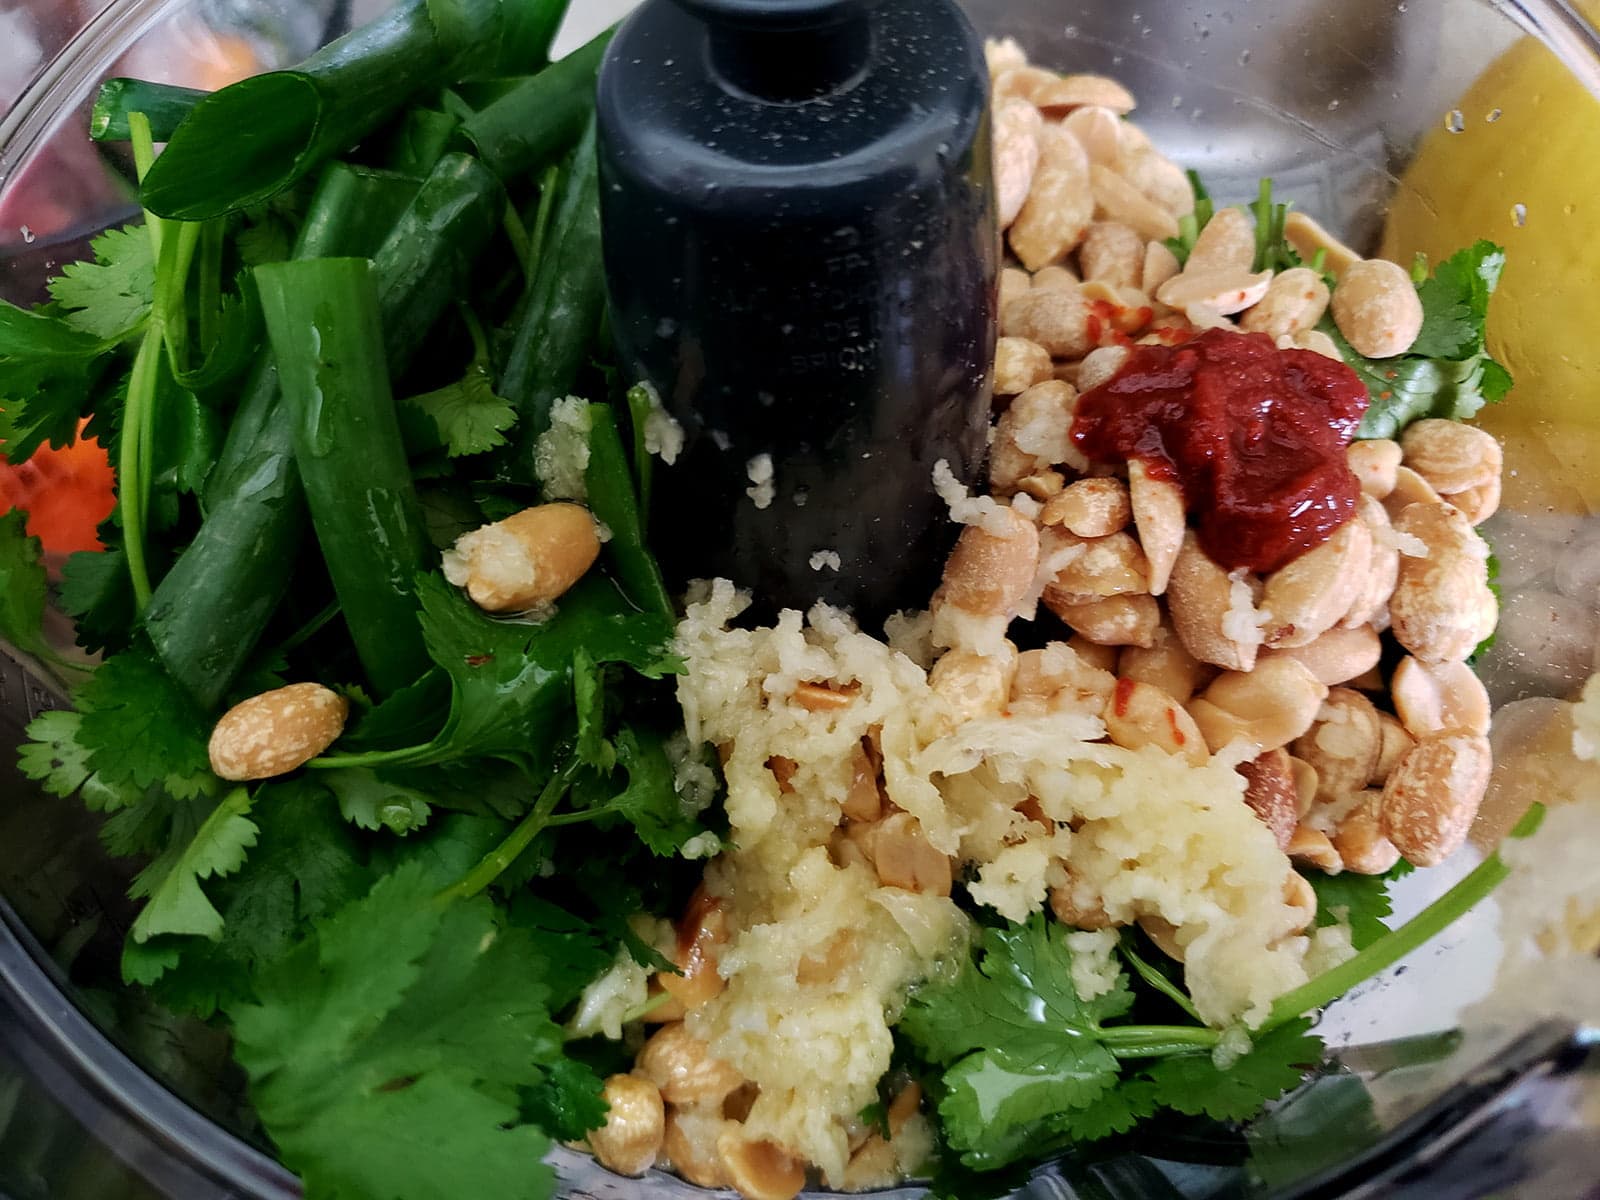 Cilantro, peanuts, garlic, green onions, and sriracha are visible in a mini food processor, waiting to be chopped together.